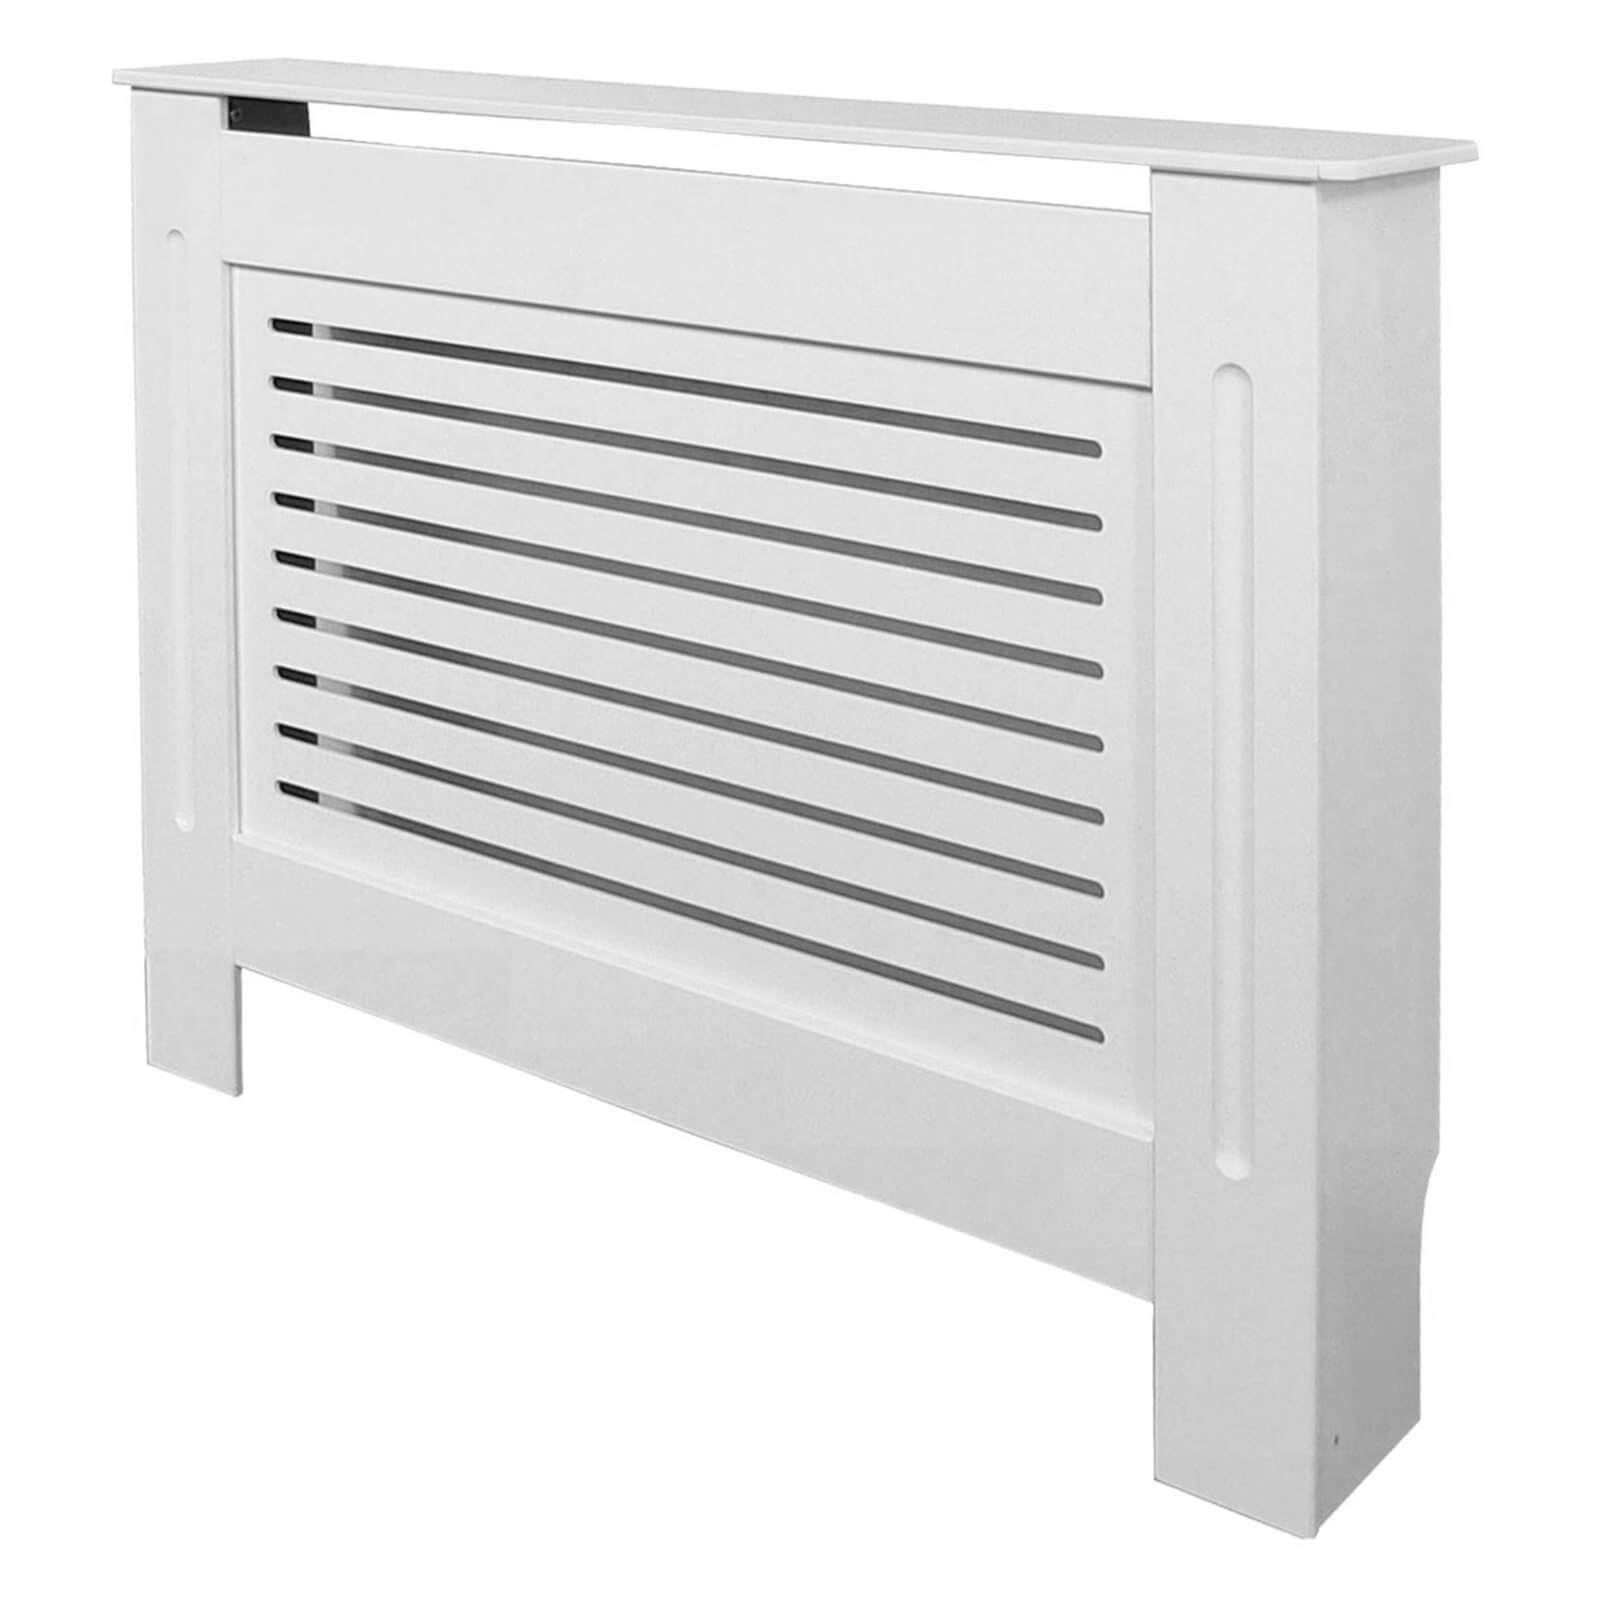 Radiator Cover with Horizontal Slatted Design in White - Small